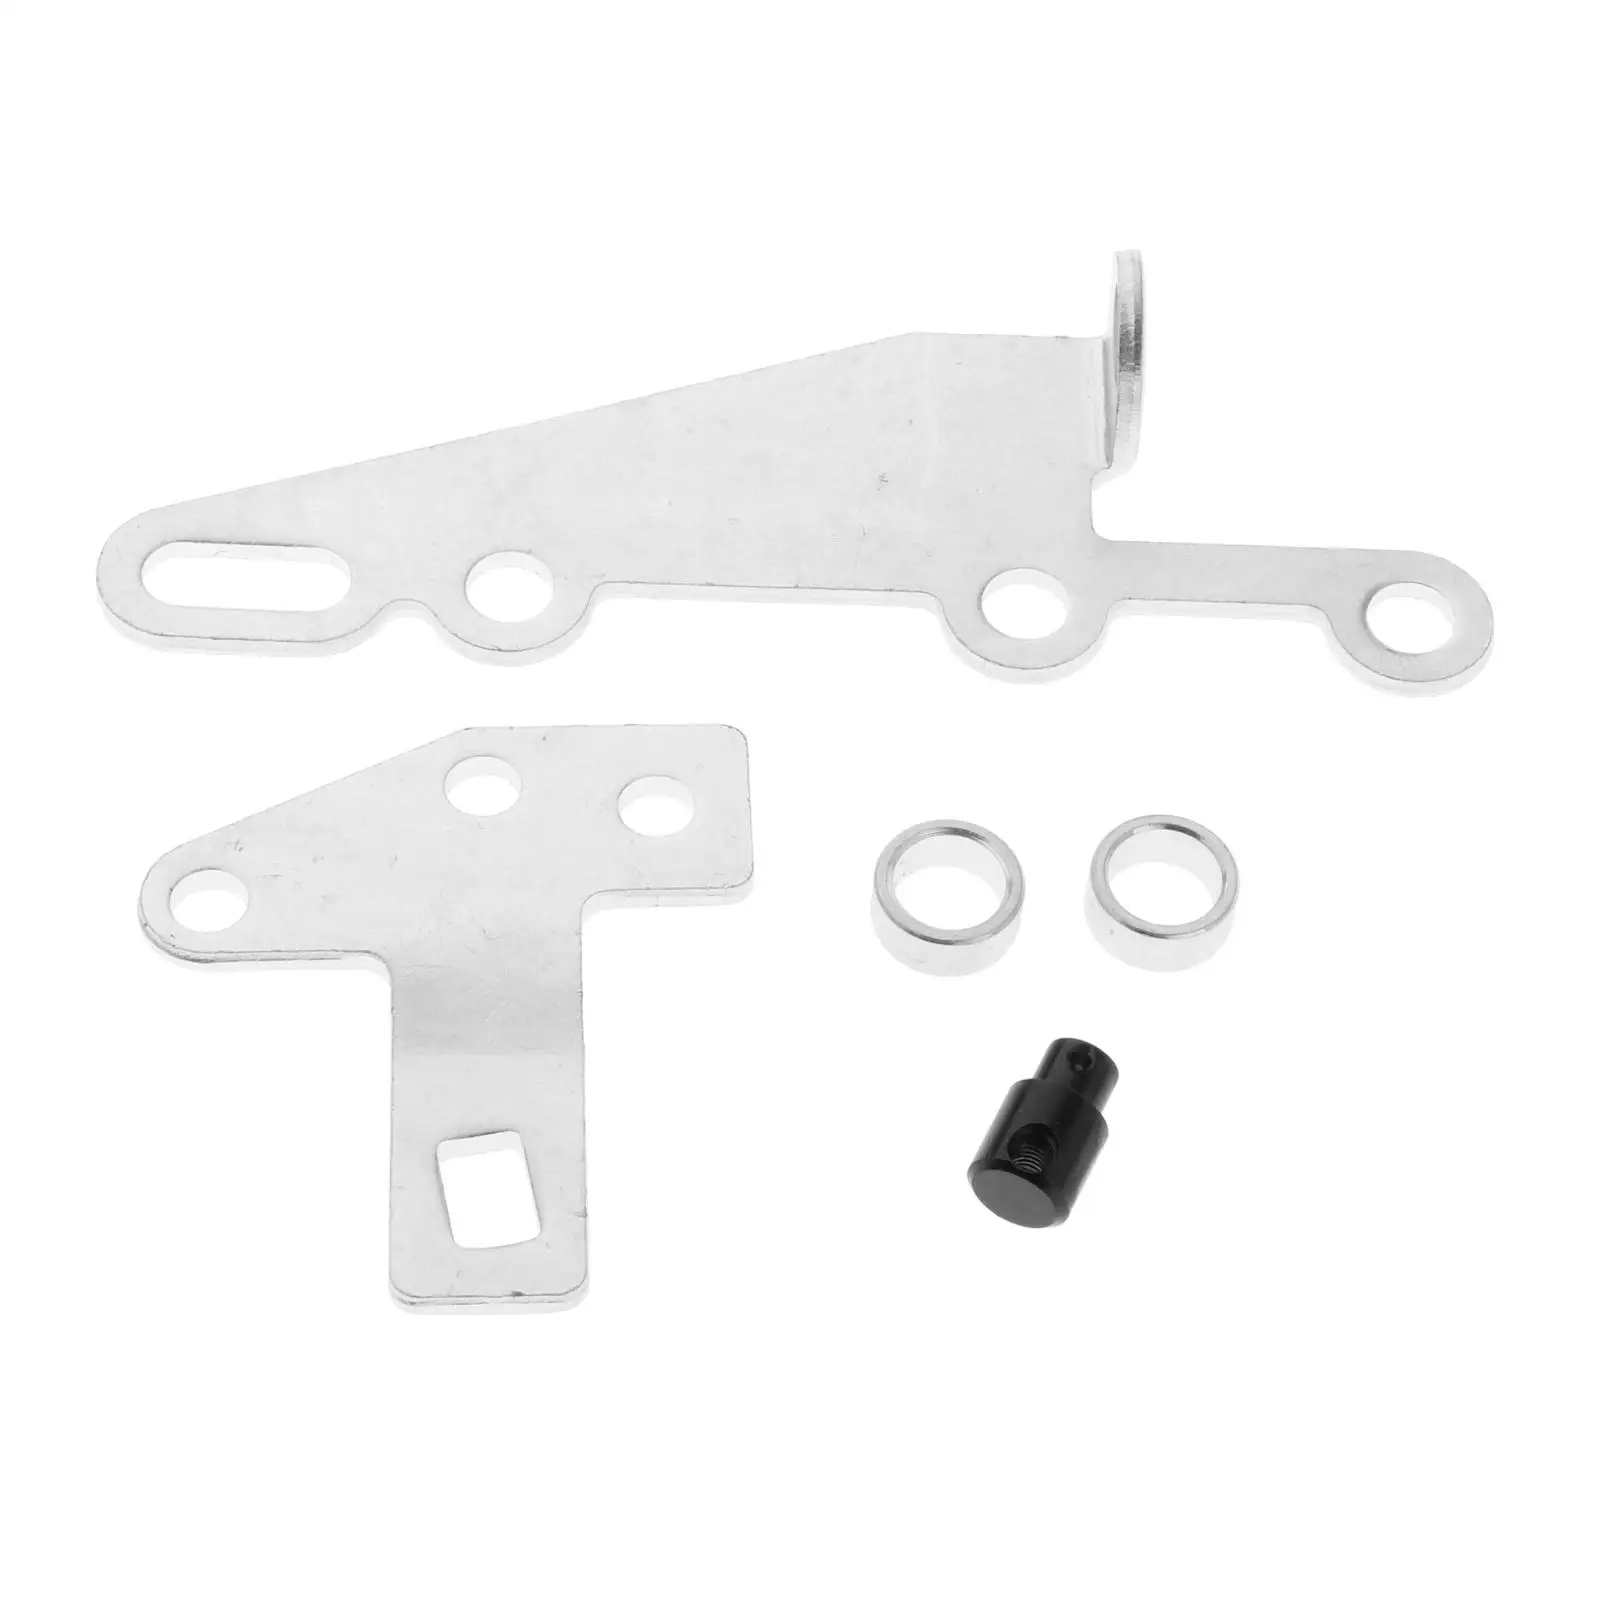 Bracket & Lever Kit Replacements Fits for Turbo TH400 TH350 TH250 4L60